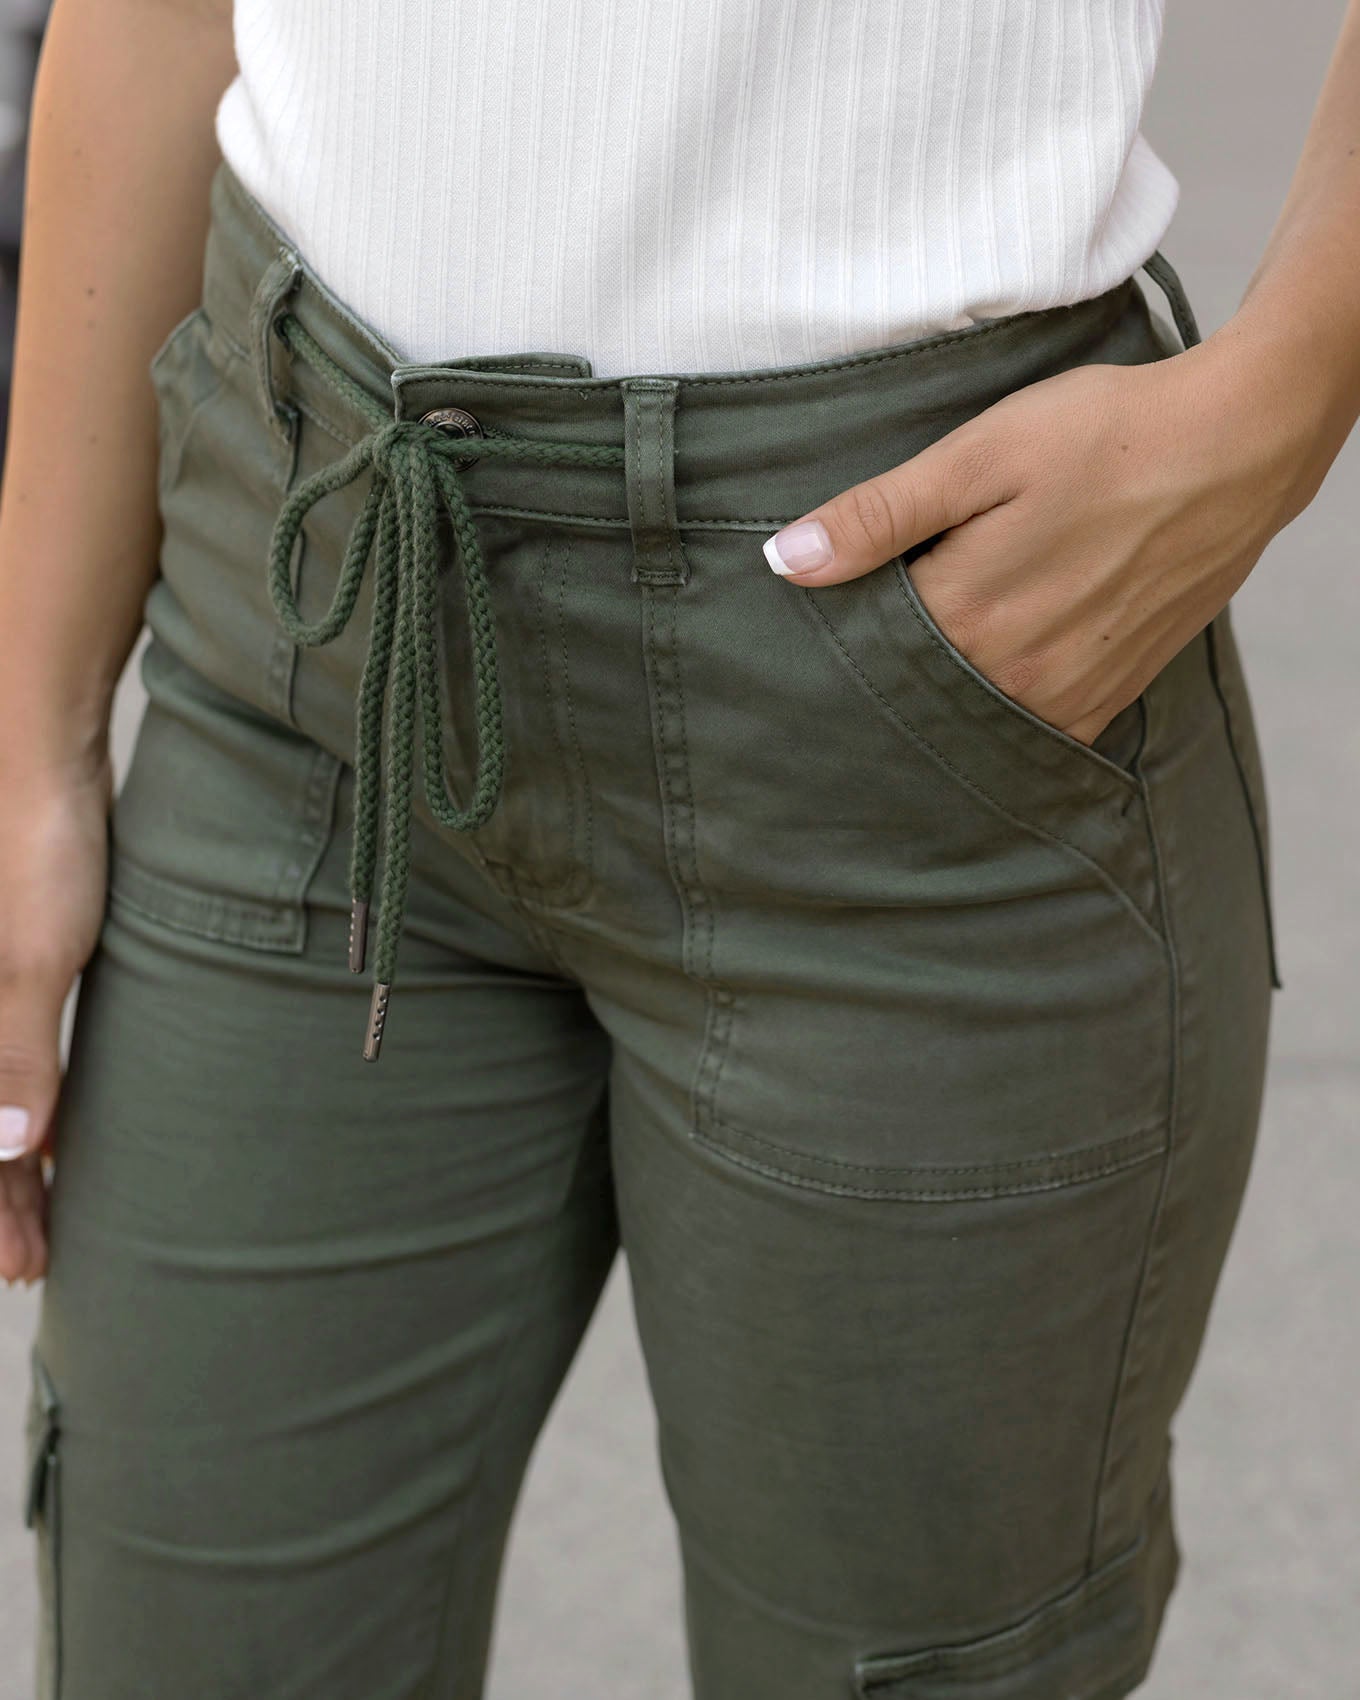 detail view of green sueded twill cargo pants